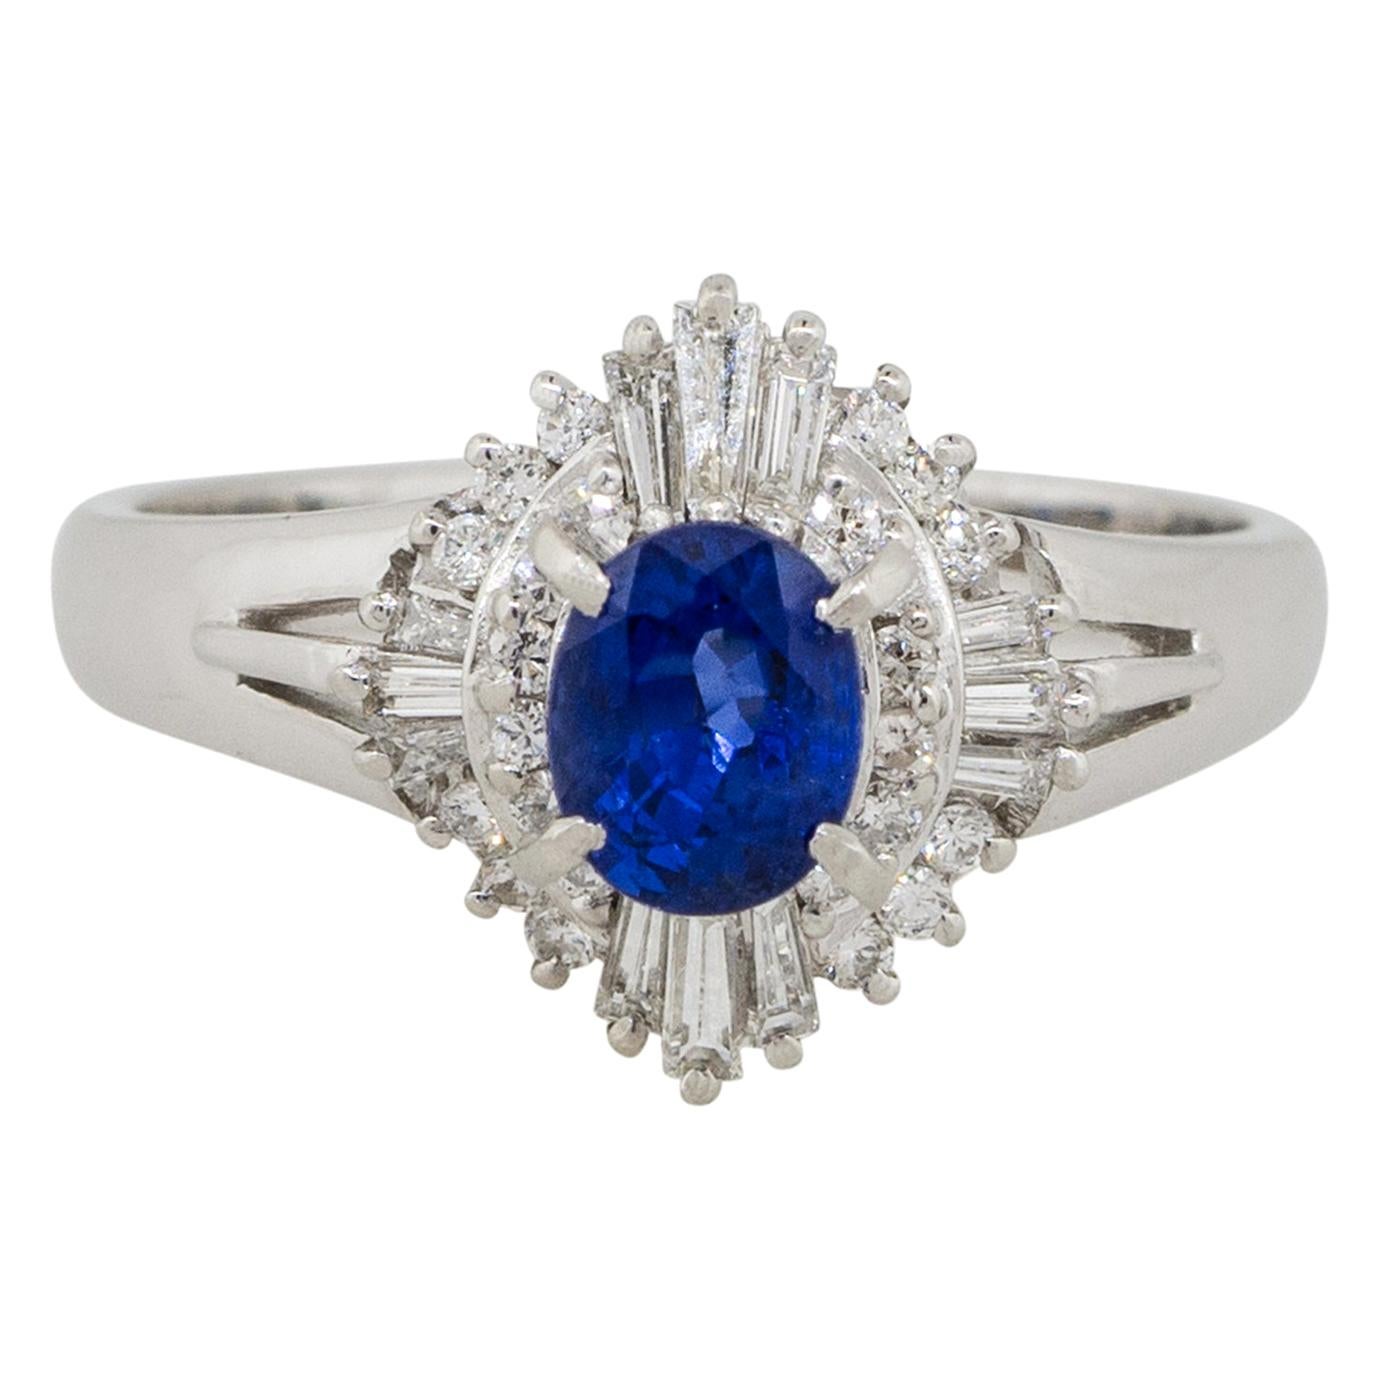 0.88 Carat Oval Sapphire Center Diamond Cocktail Ring Platinum in Stock For Sale